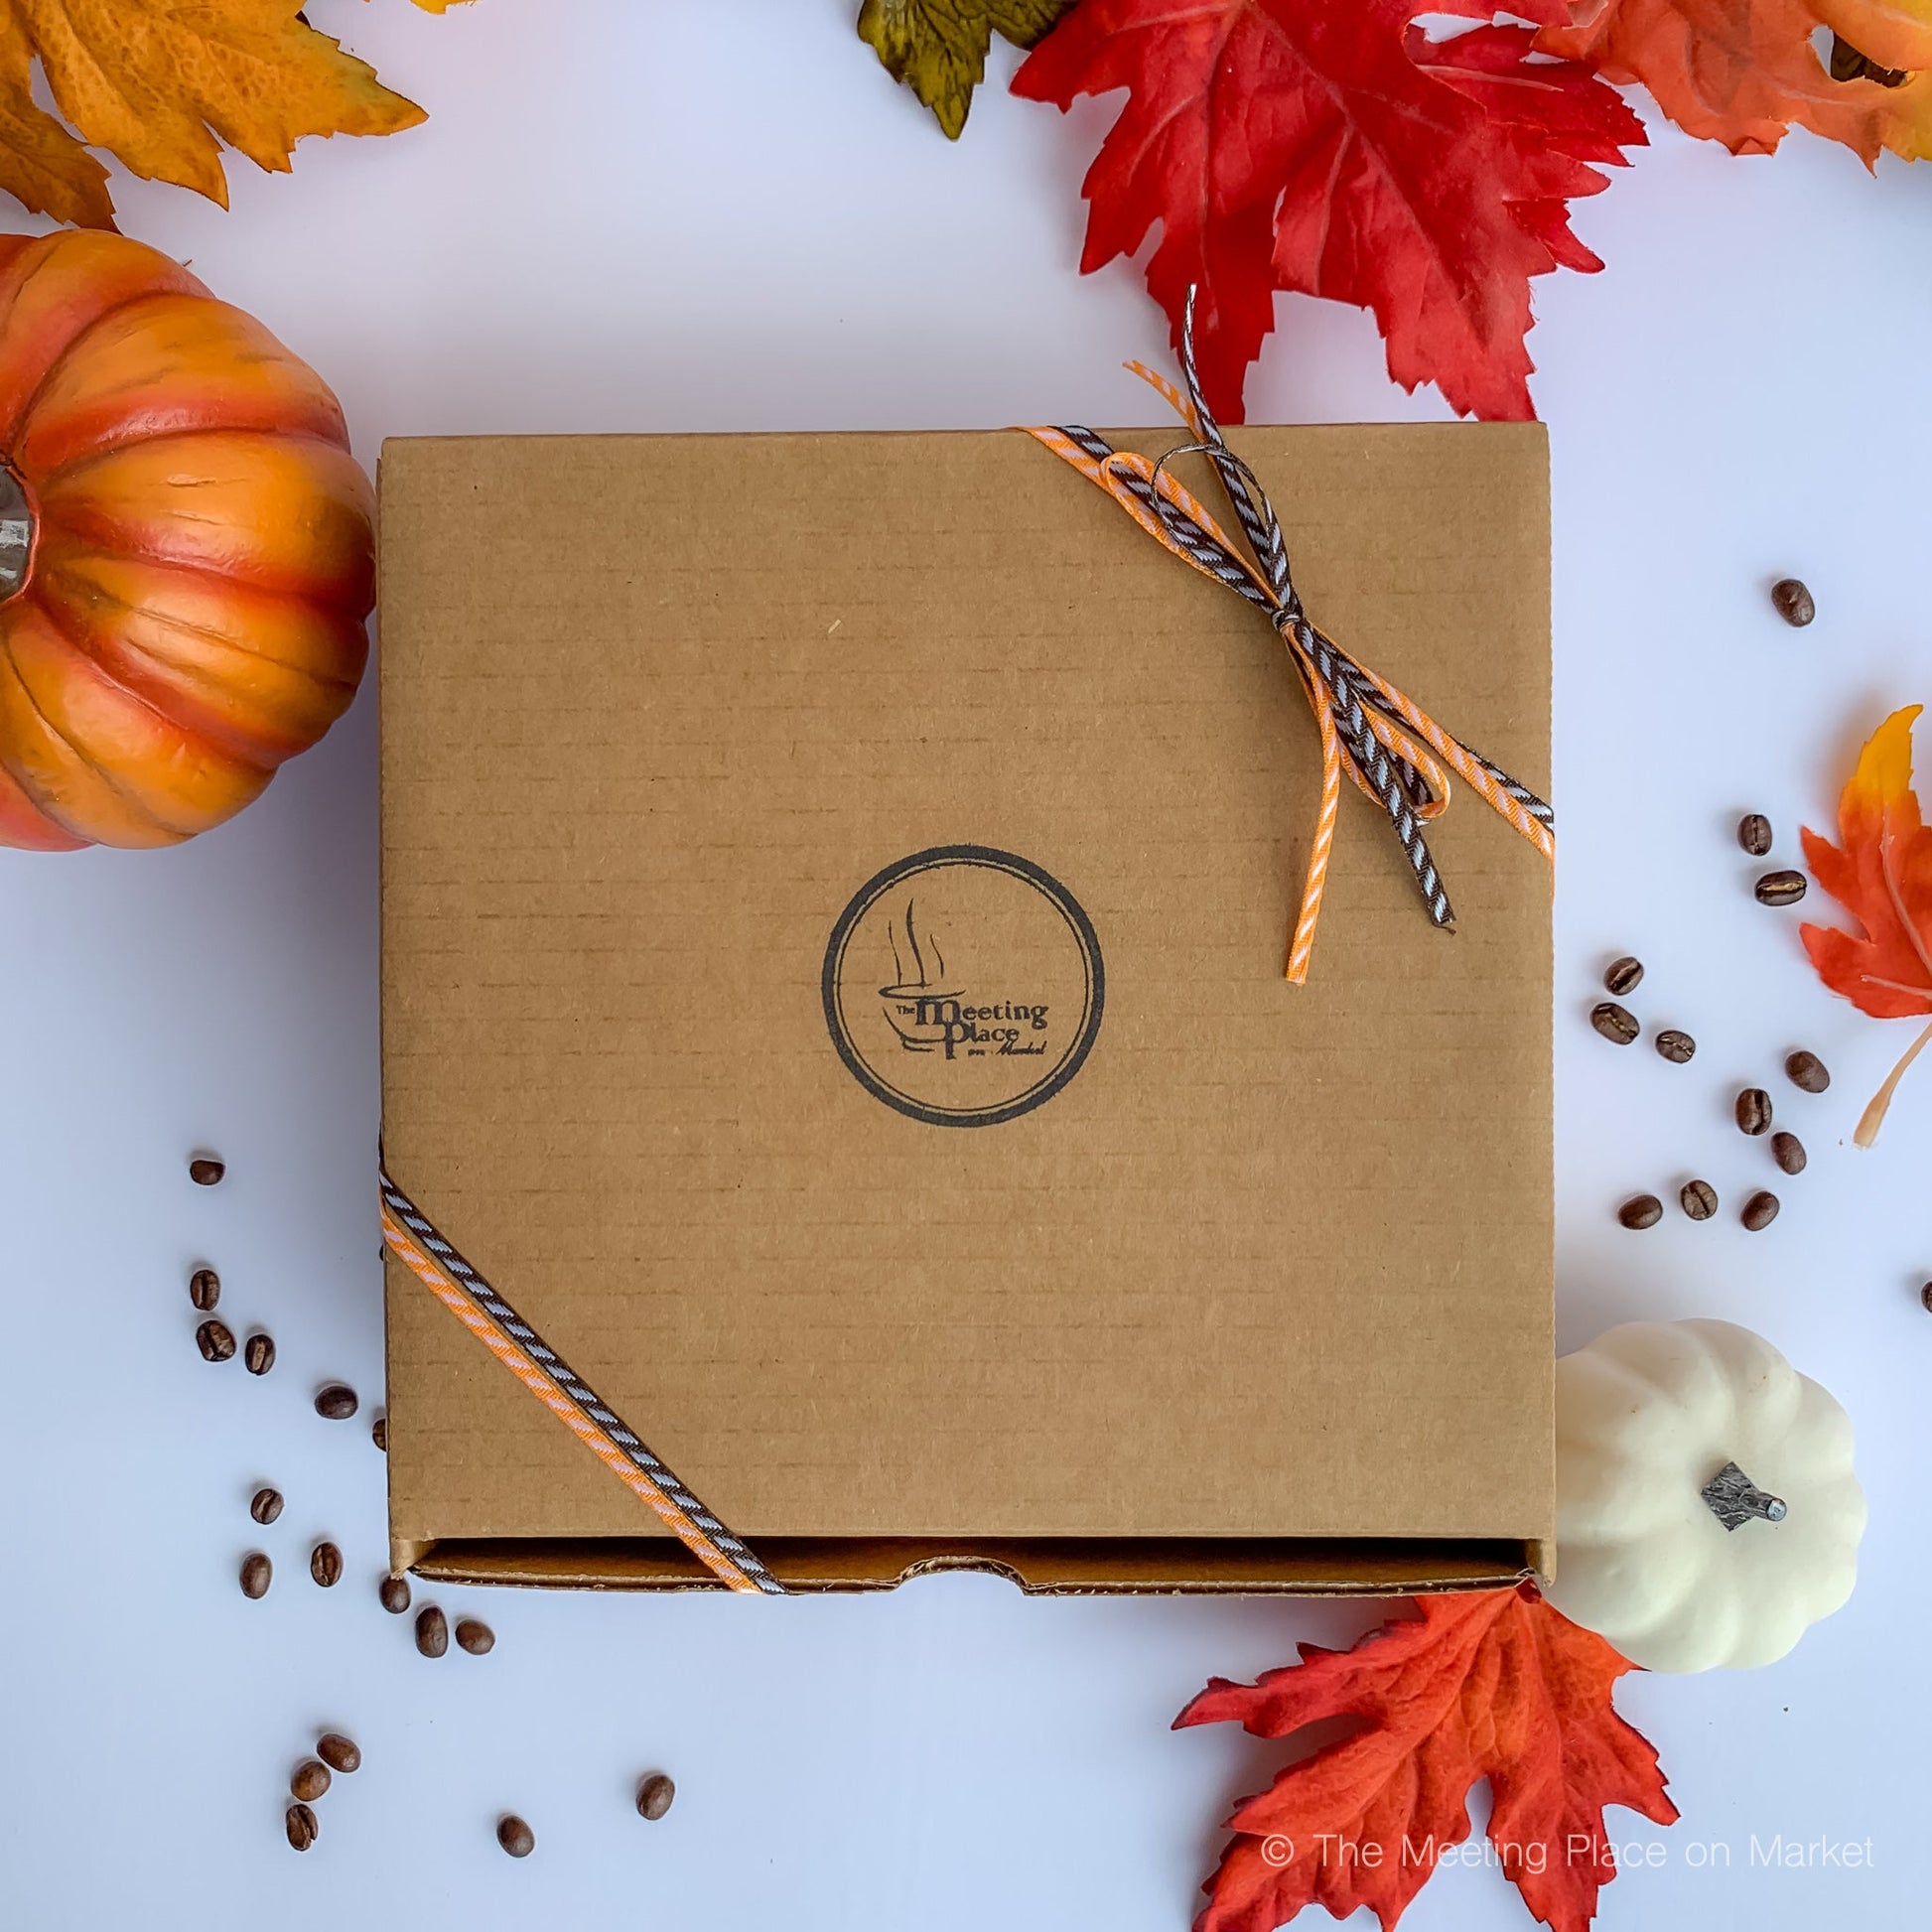 Fall Holiday Coffee Sampler Gift Box, Thanksgiving Gift Basket, Pumpkin Spice Coffee Fall / Autumn Gifts - The Meeting Place on Market